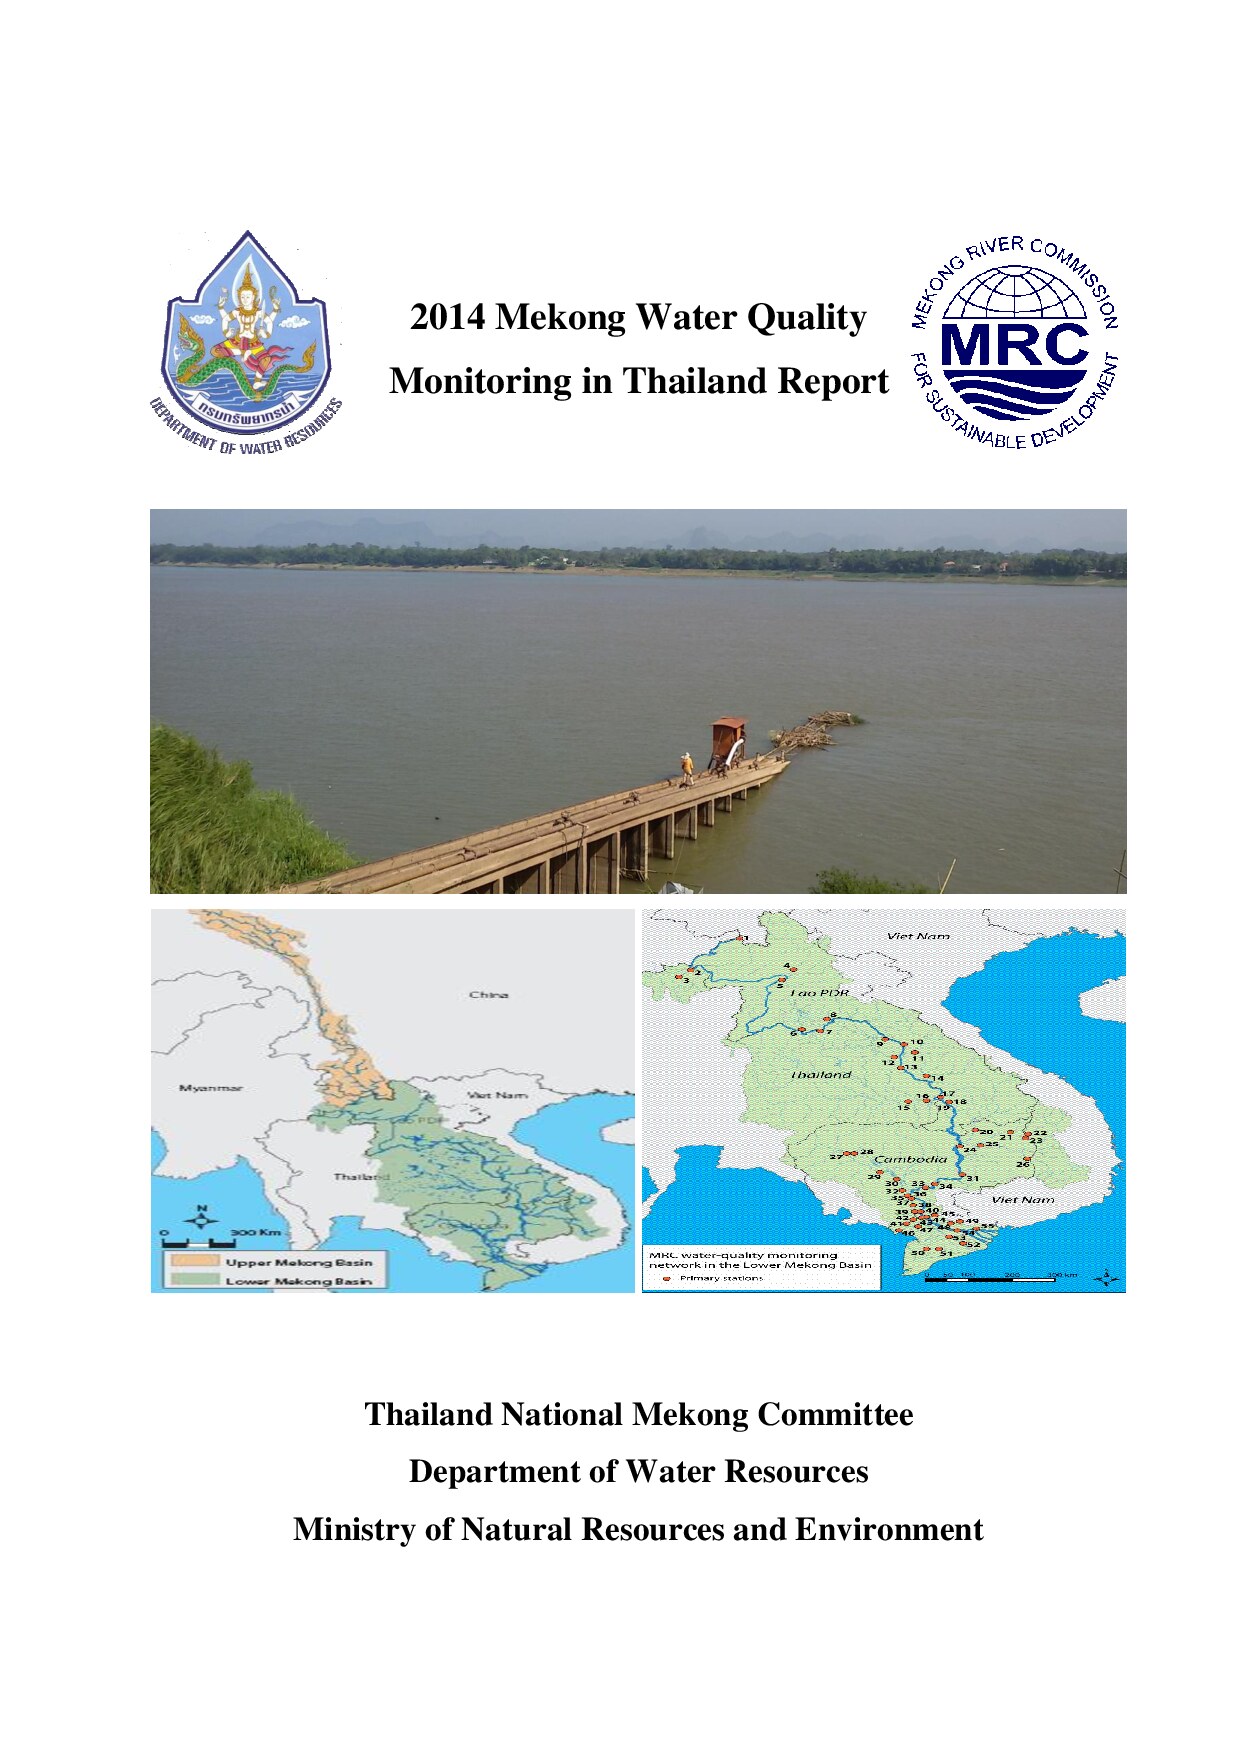 2014 Mekong Water Quality Monitoring in Thailand Report